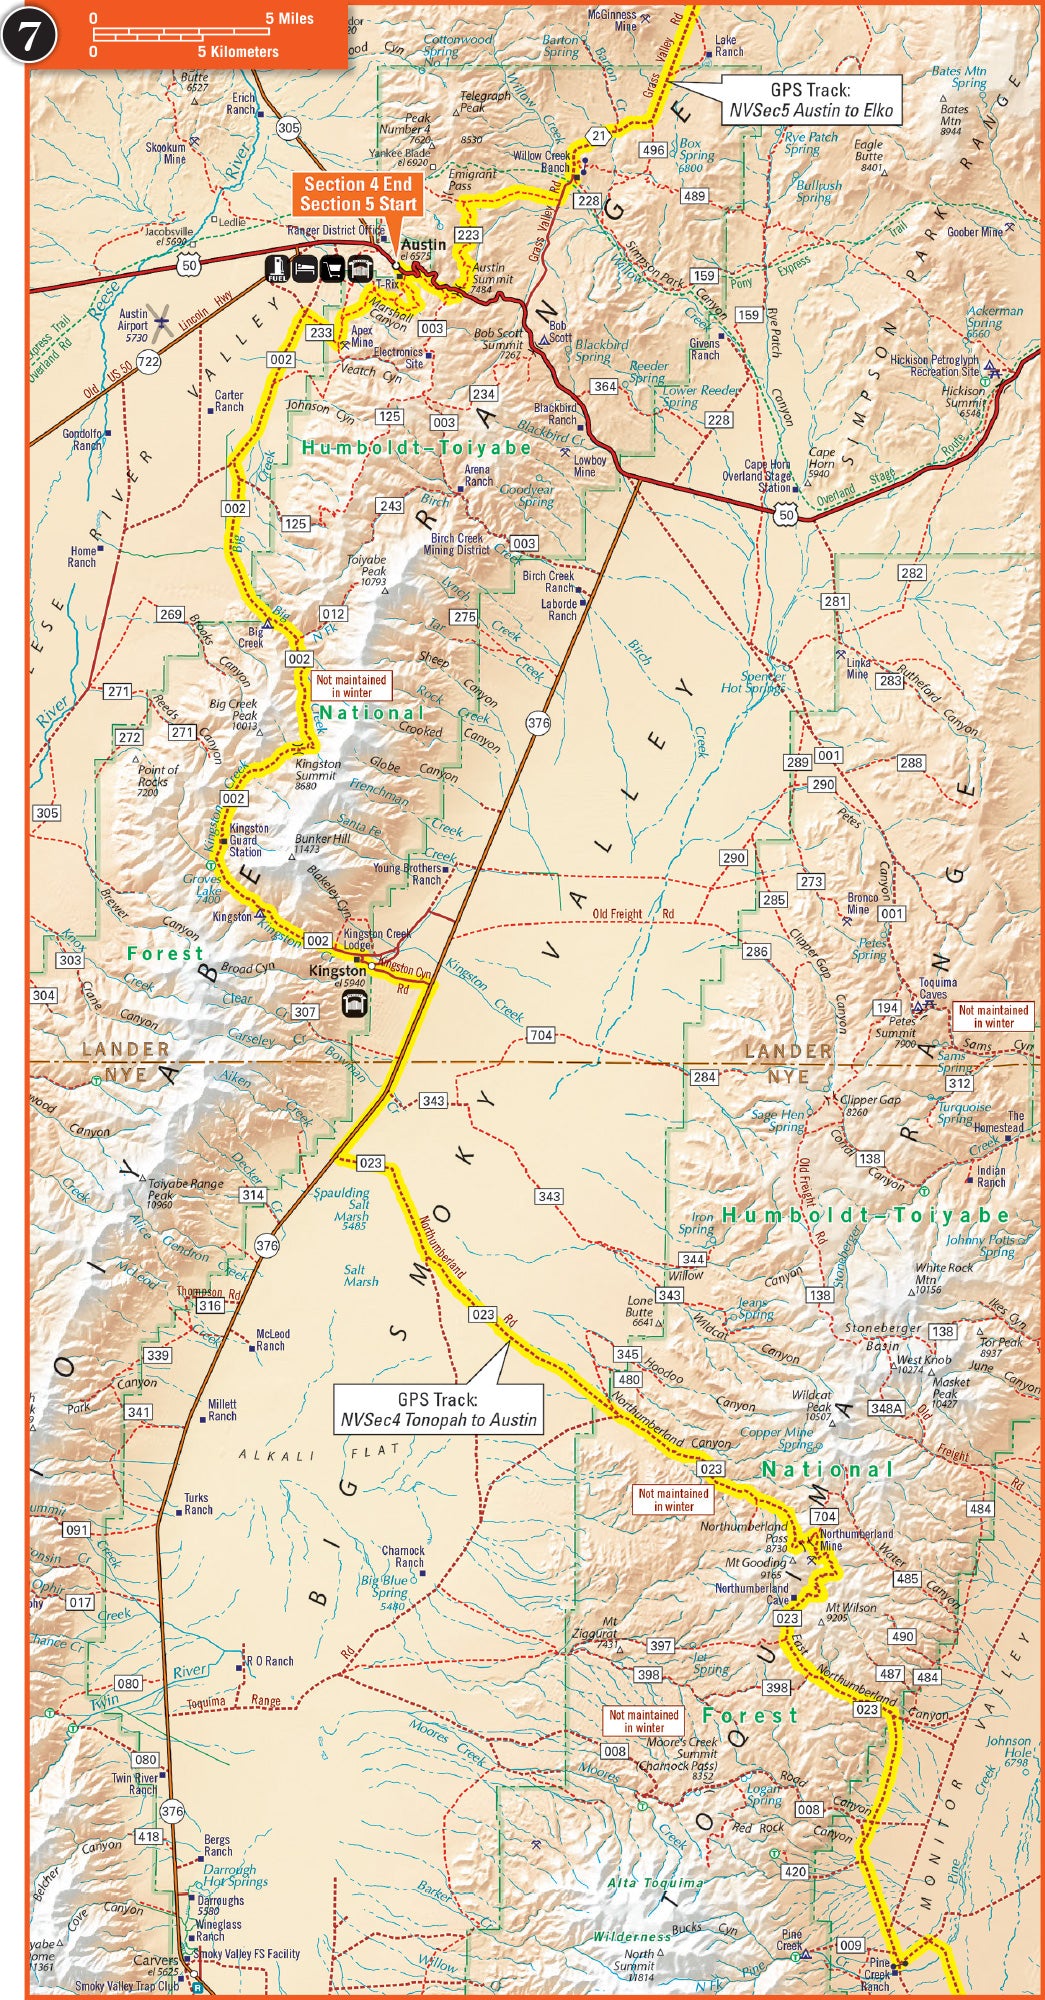 Nevada Backcountry Discovery Route (NVBDR) Map